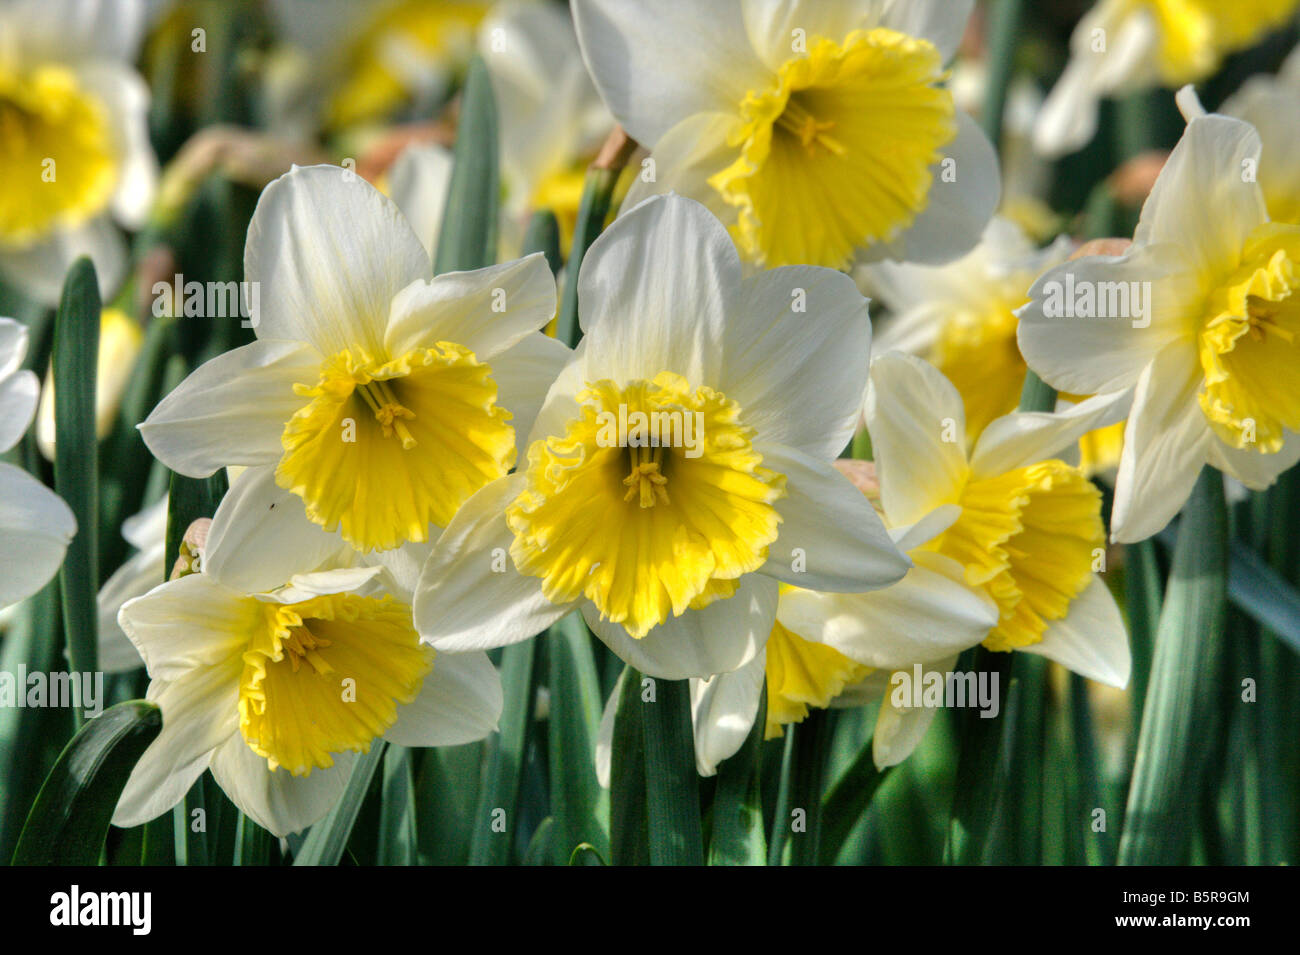 A close up of white daffodils in bloom Stock Photo